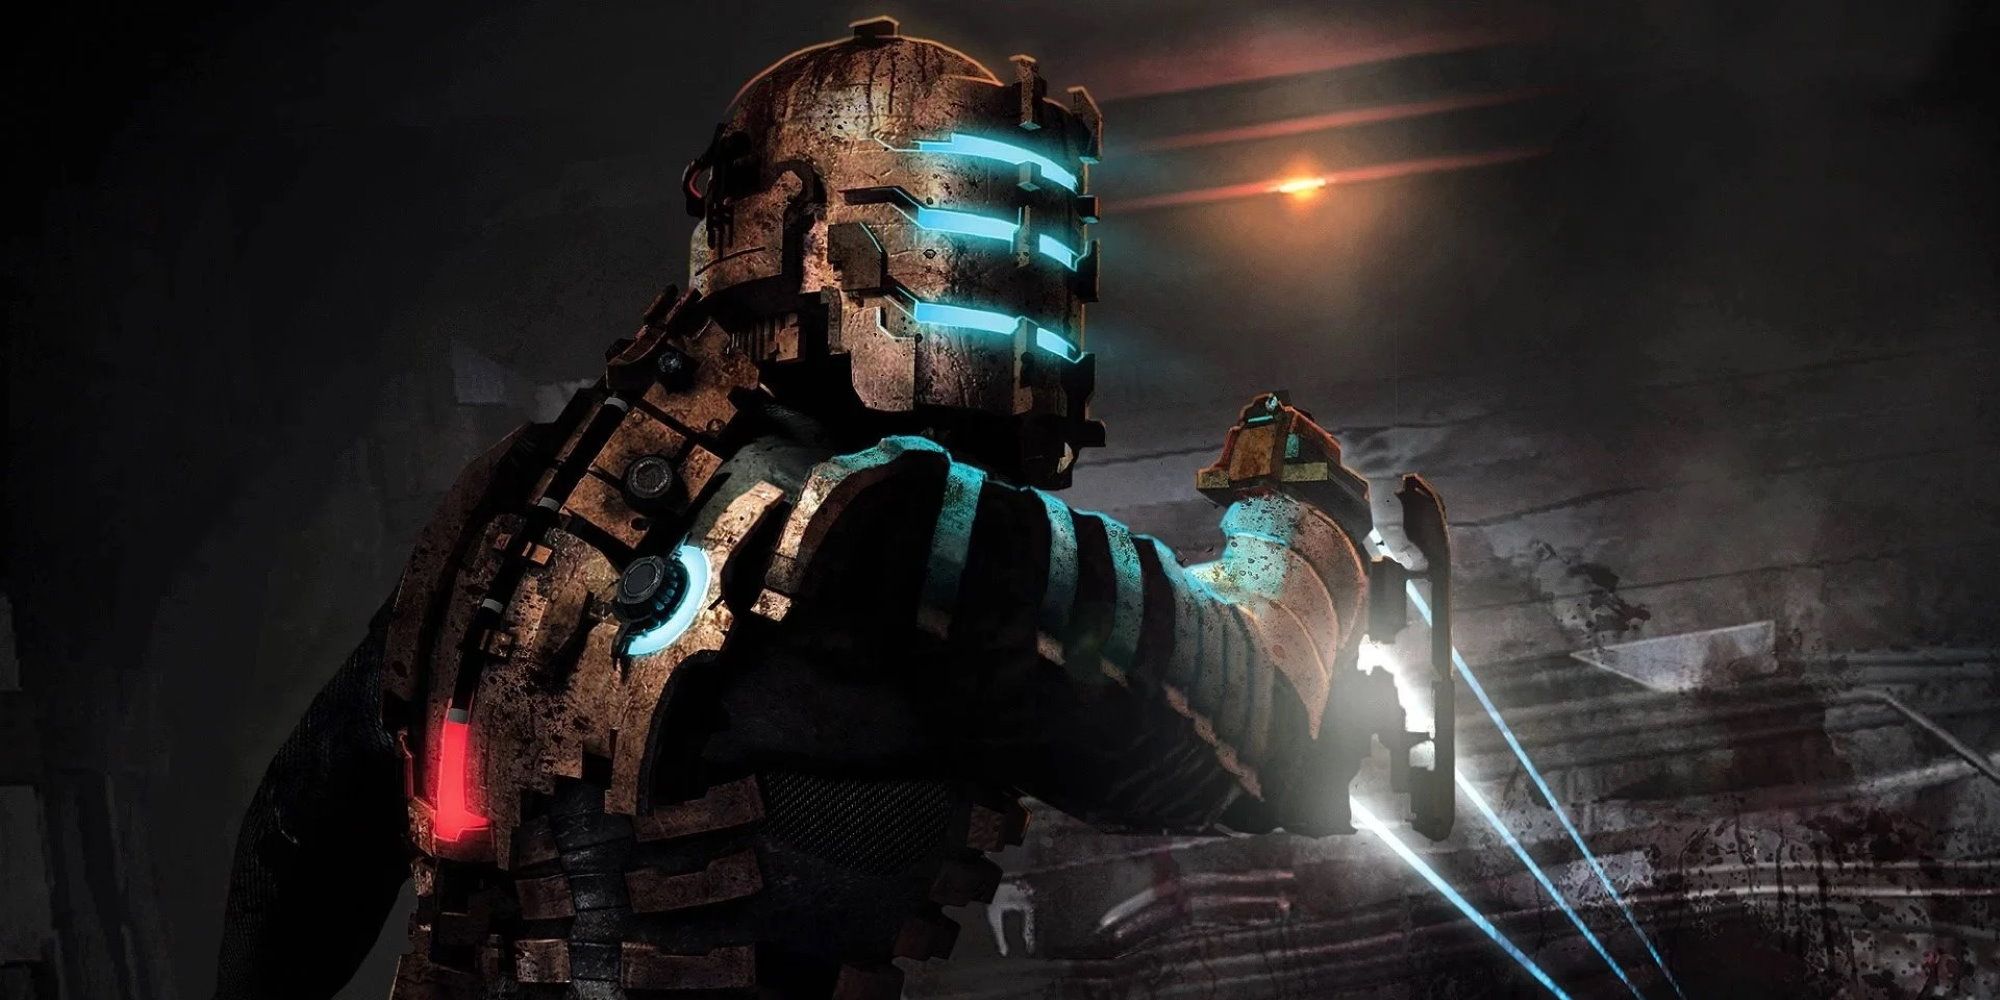 will they remaster dead space